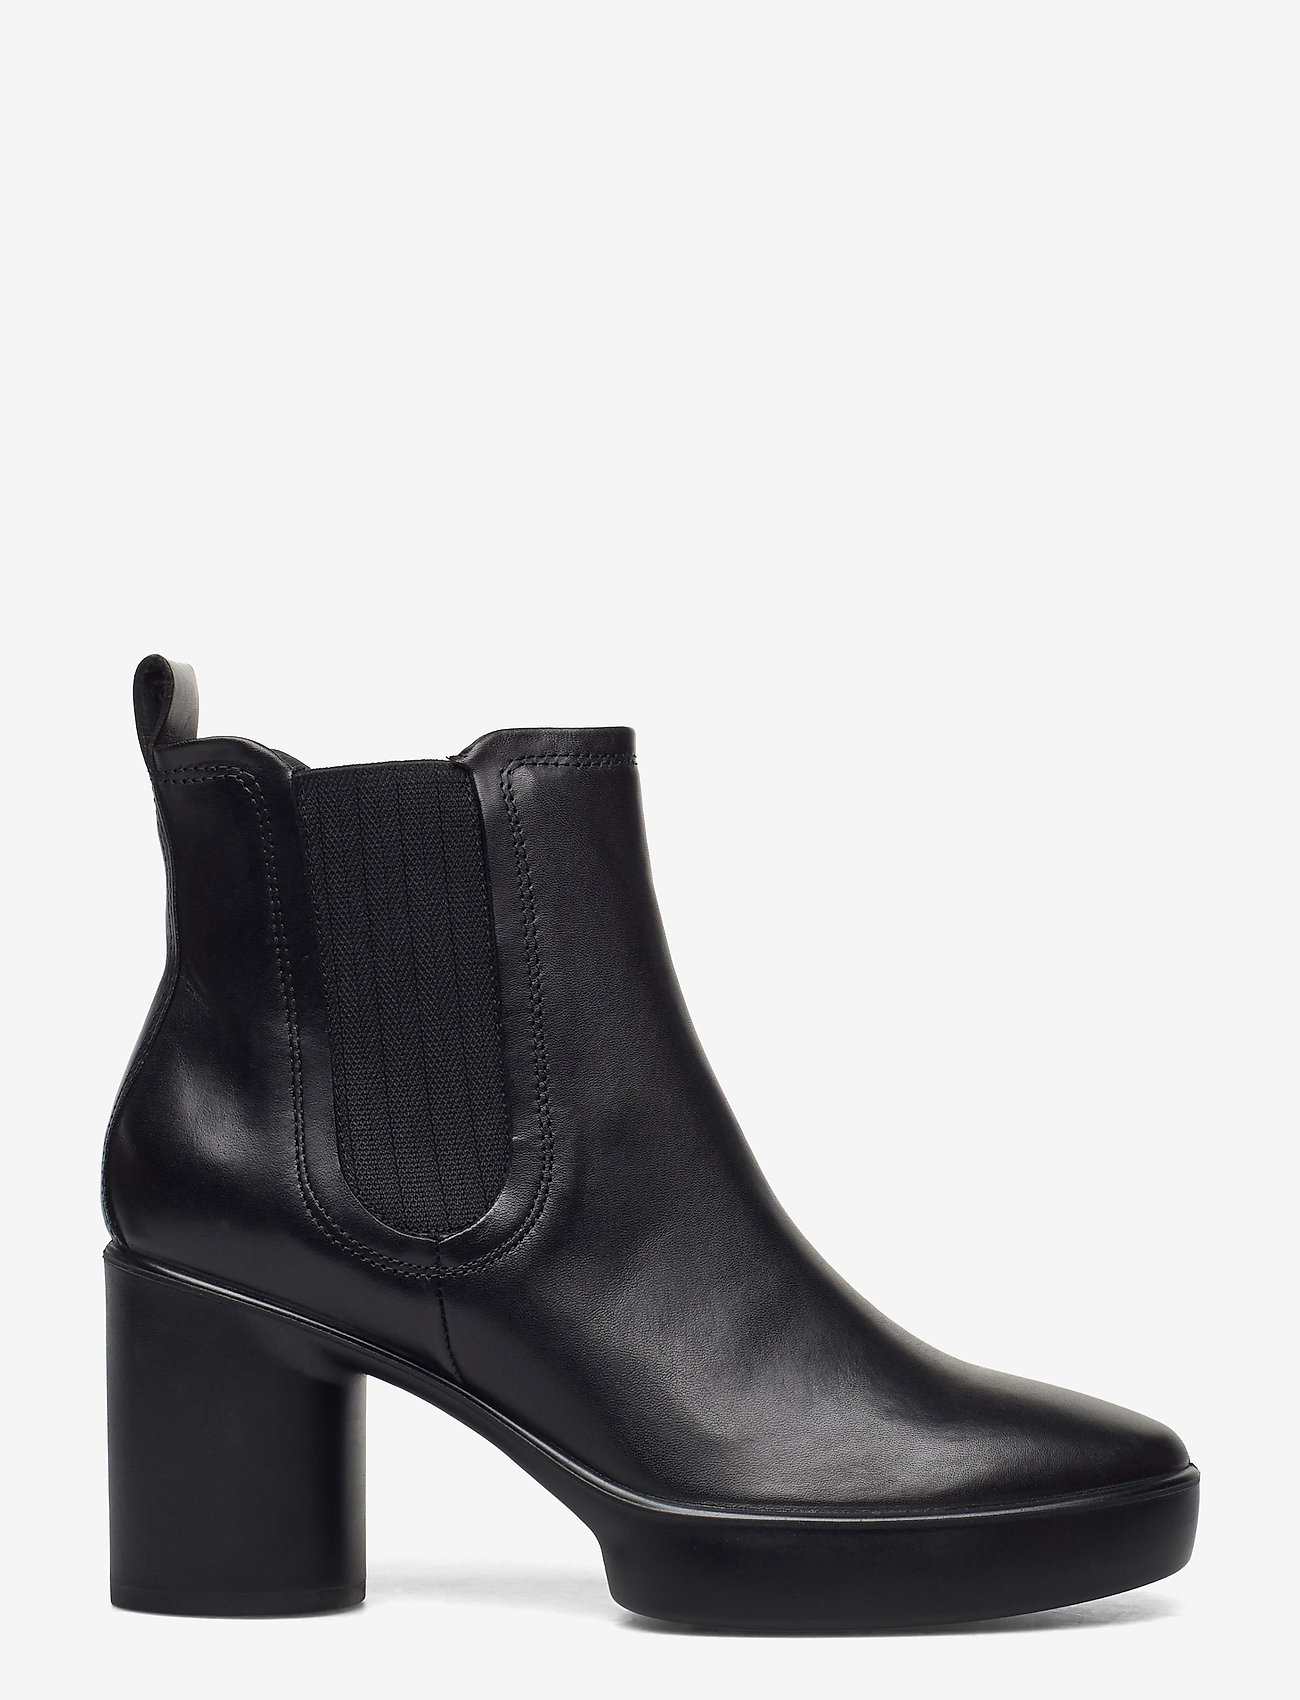 ECCO Shape Sculpted Motion 55 - Heeled ankle boots | Boozt.com